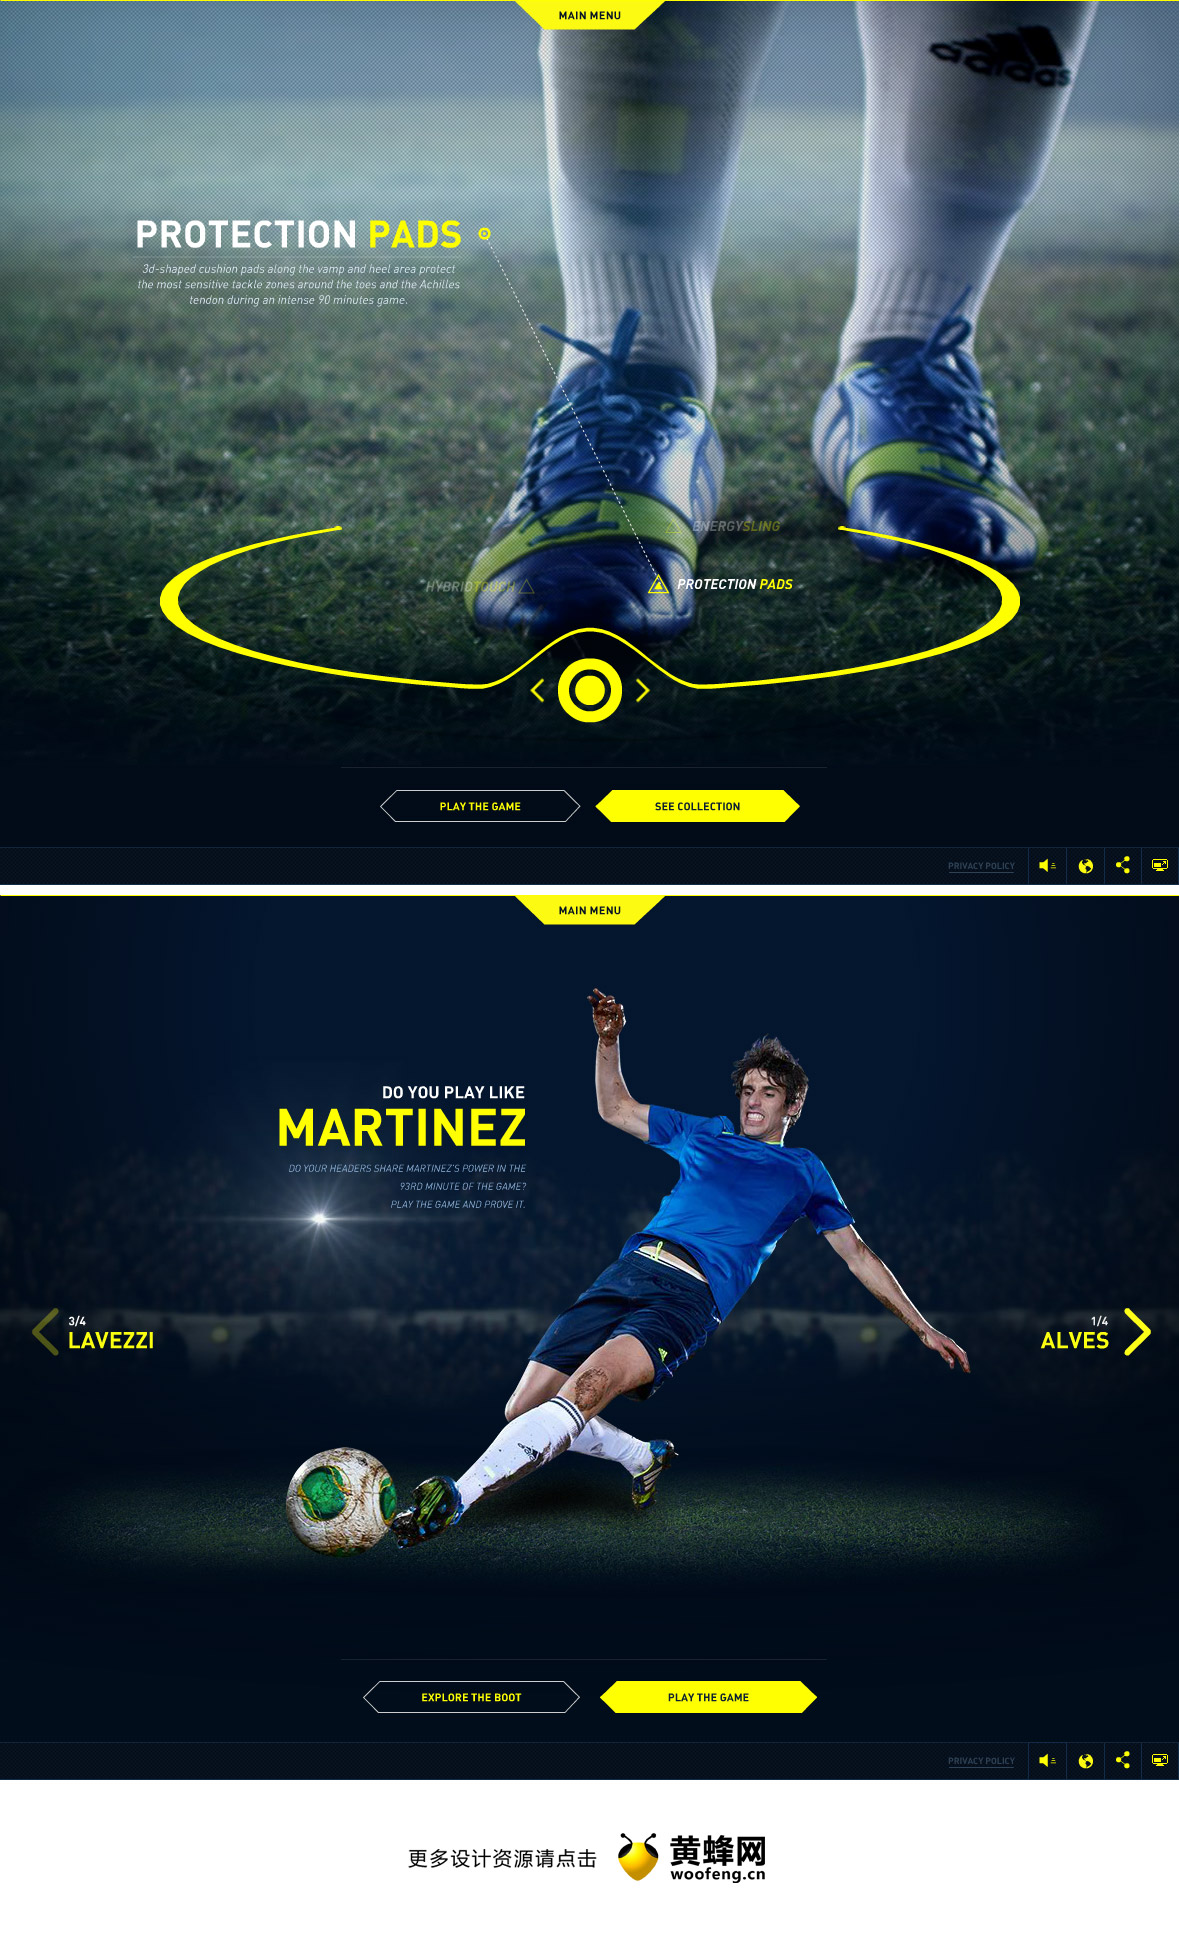 adidas – Nitrocharge your game 电劲无穷尽 掌控全场，来源自黄蜂网https://woofeng.cn/